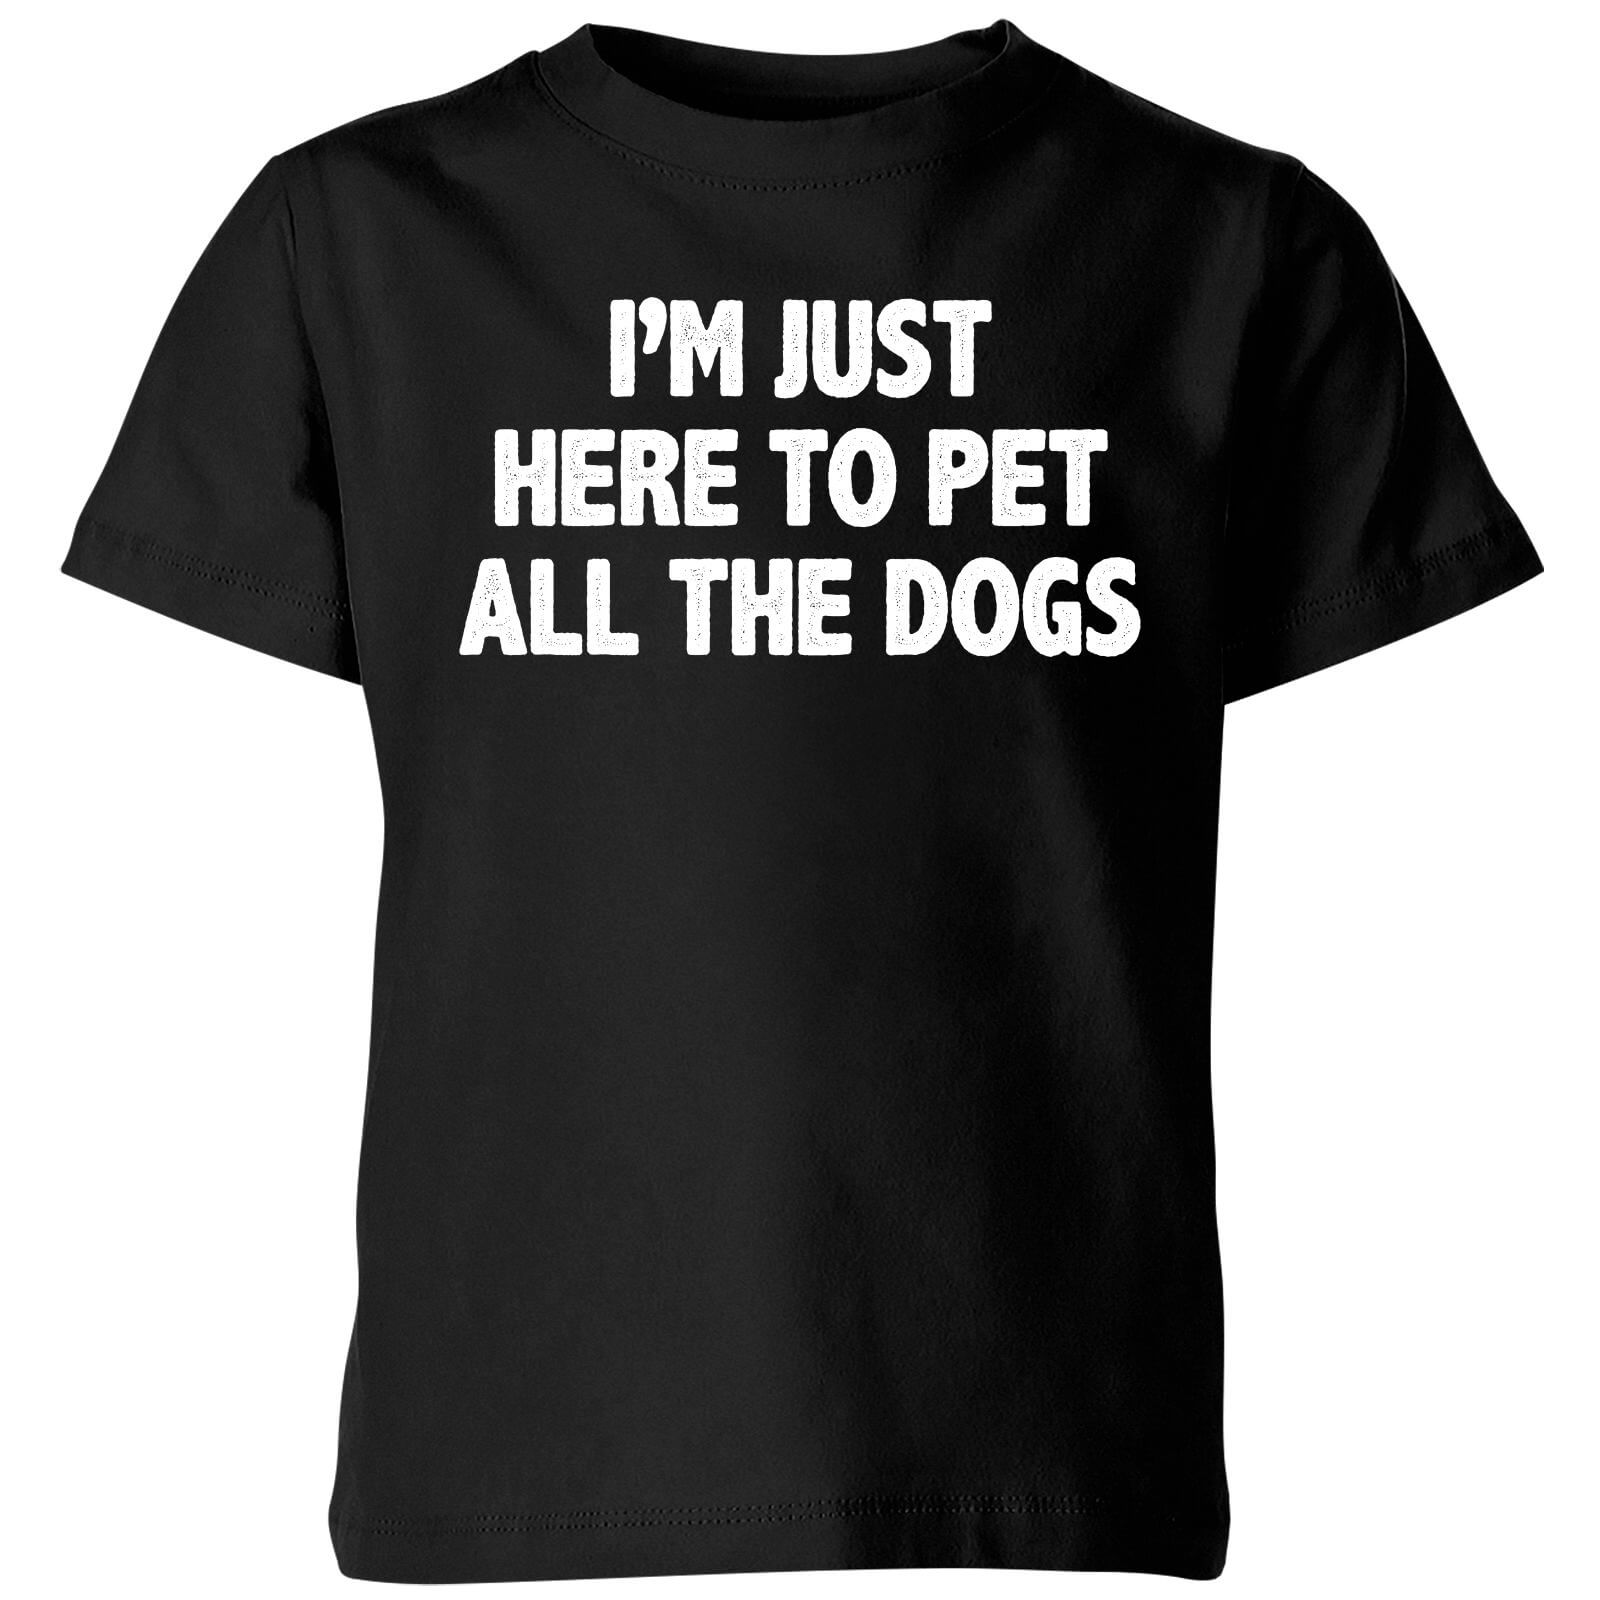 I'm Just Here To Pet The Dogs Kids' T-Shirt - Black - 3-4 Years - Black